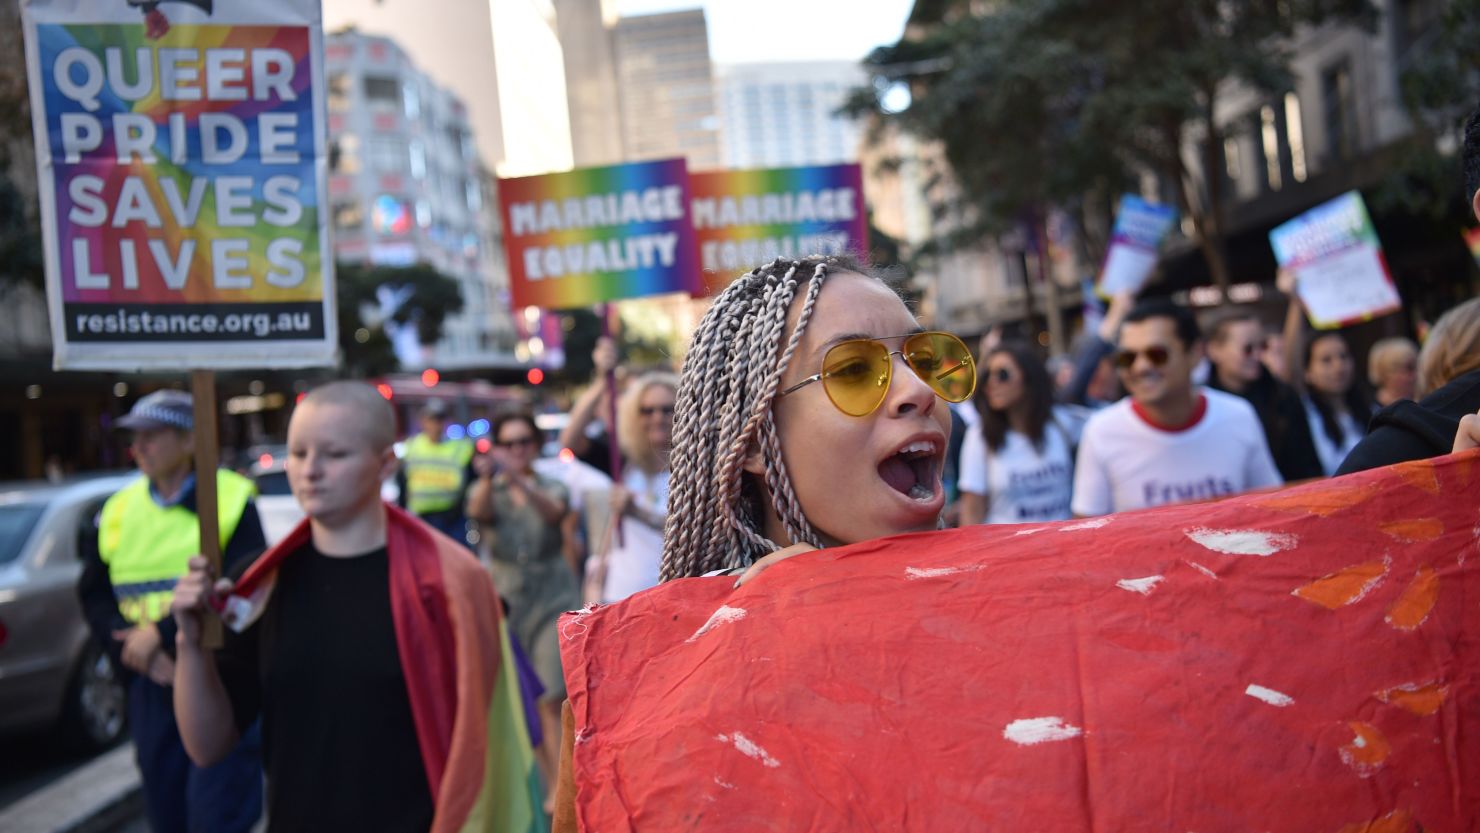 Supporters of same-sex marriage carry banners and shout slogans as they march in Sydney on August 6.